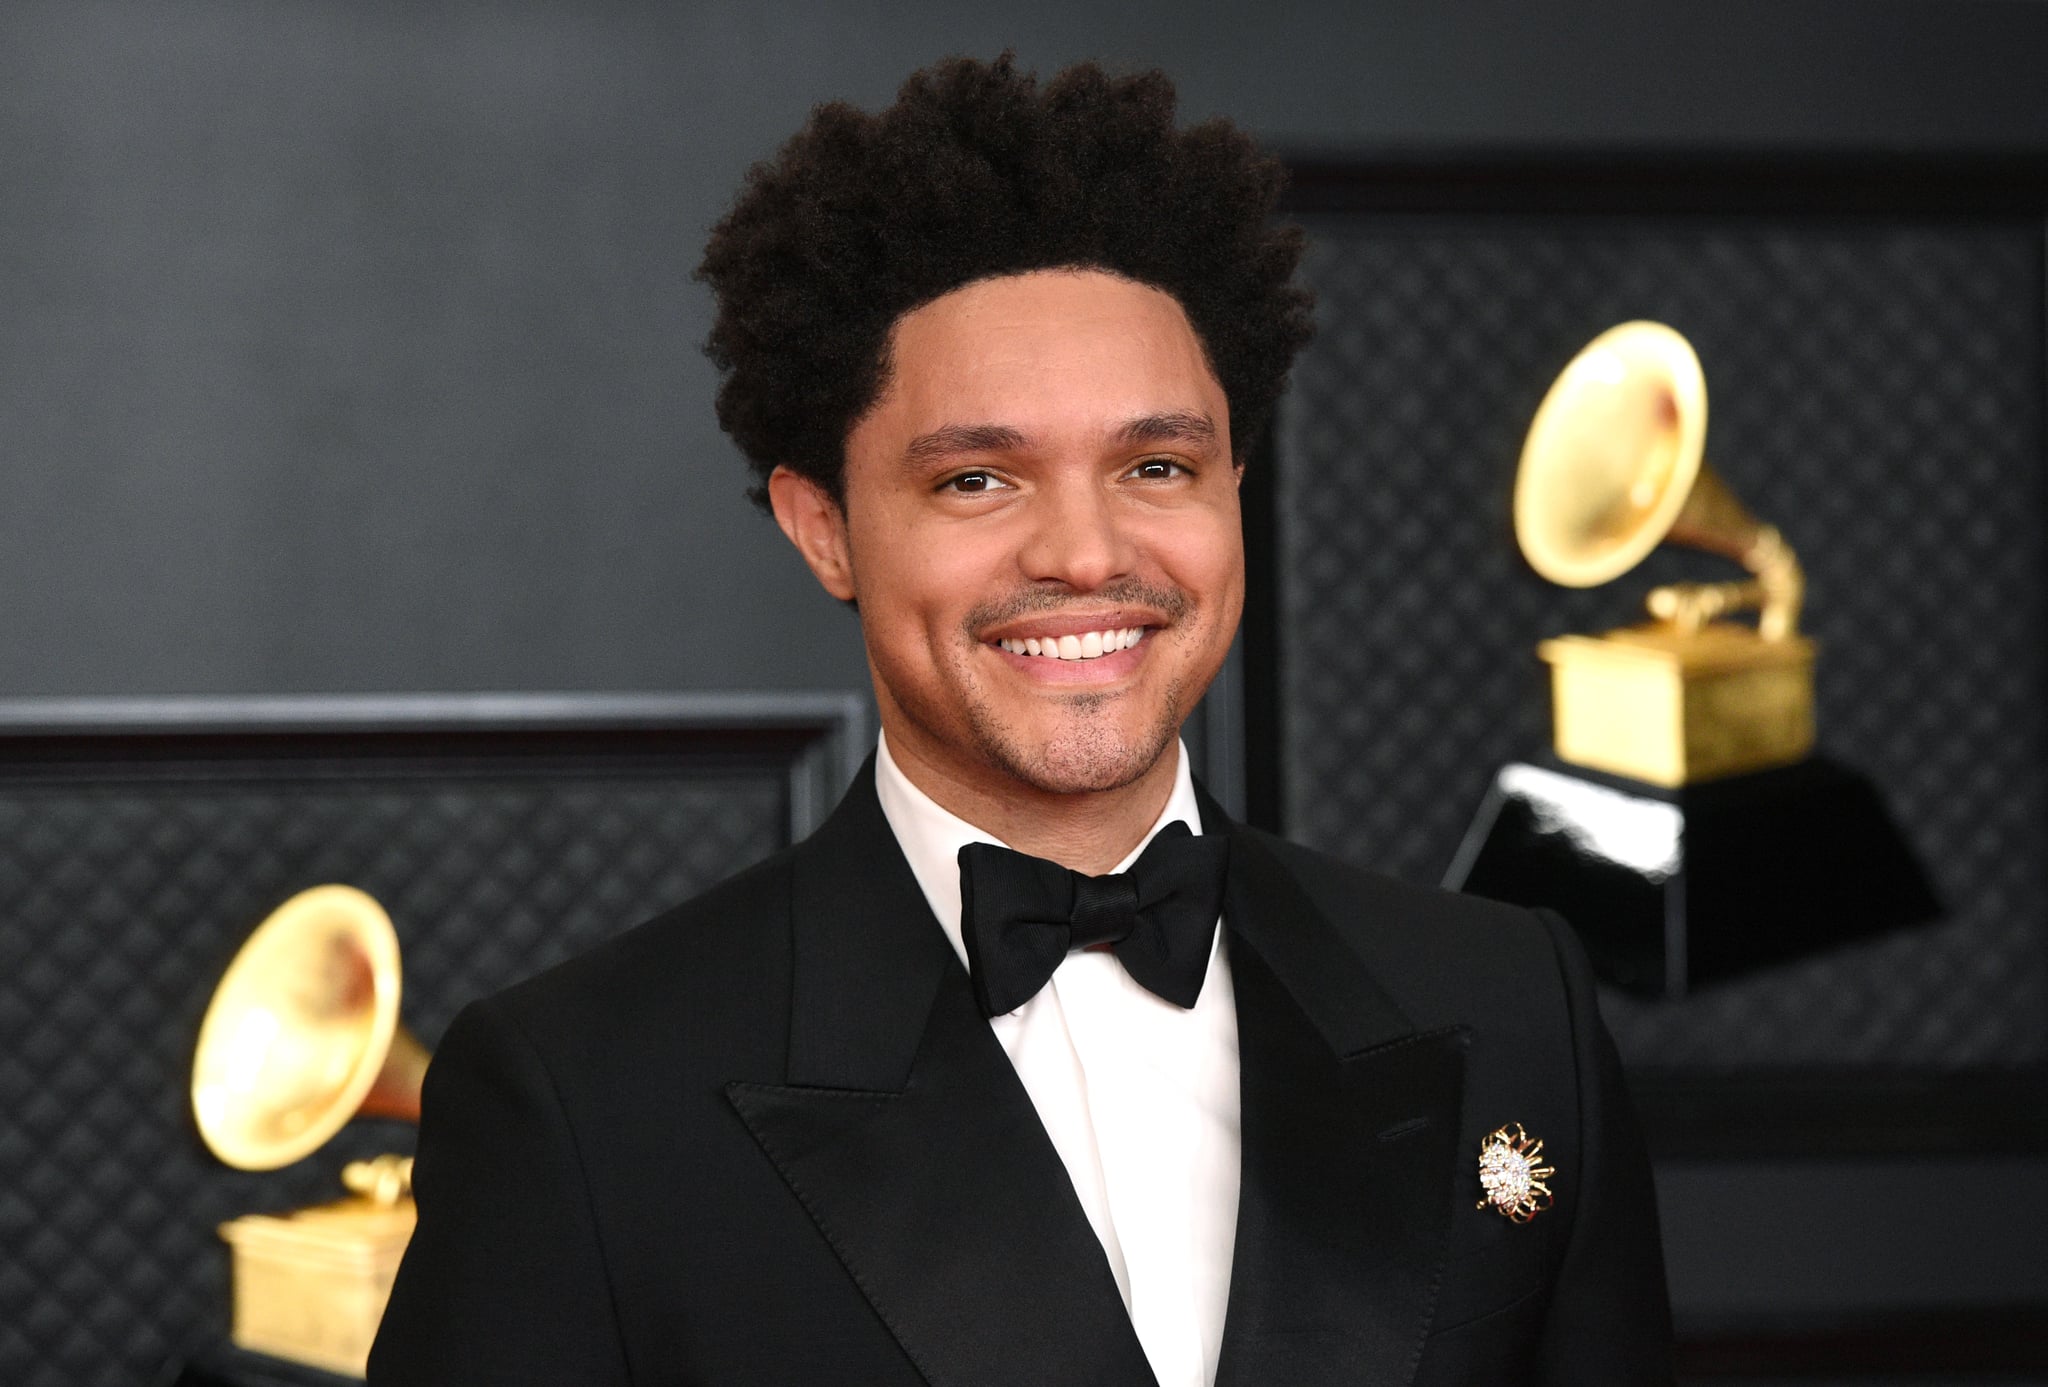 LOS ANGELES, CALIFORNIA - MARCH 14: Trevor Noah attends the 63rd Annual GRAMMY Awards at Los Angeles Convention Centre on March 14, 2021 in Los Angeles, California. (Photo by Kevin Mazur/Getty Images for The Recording Academy )